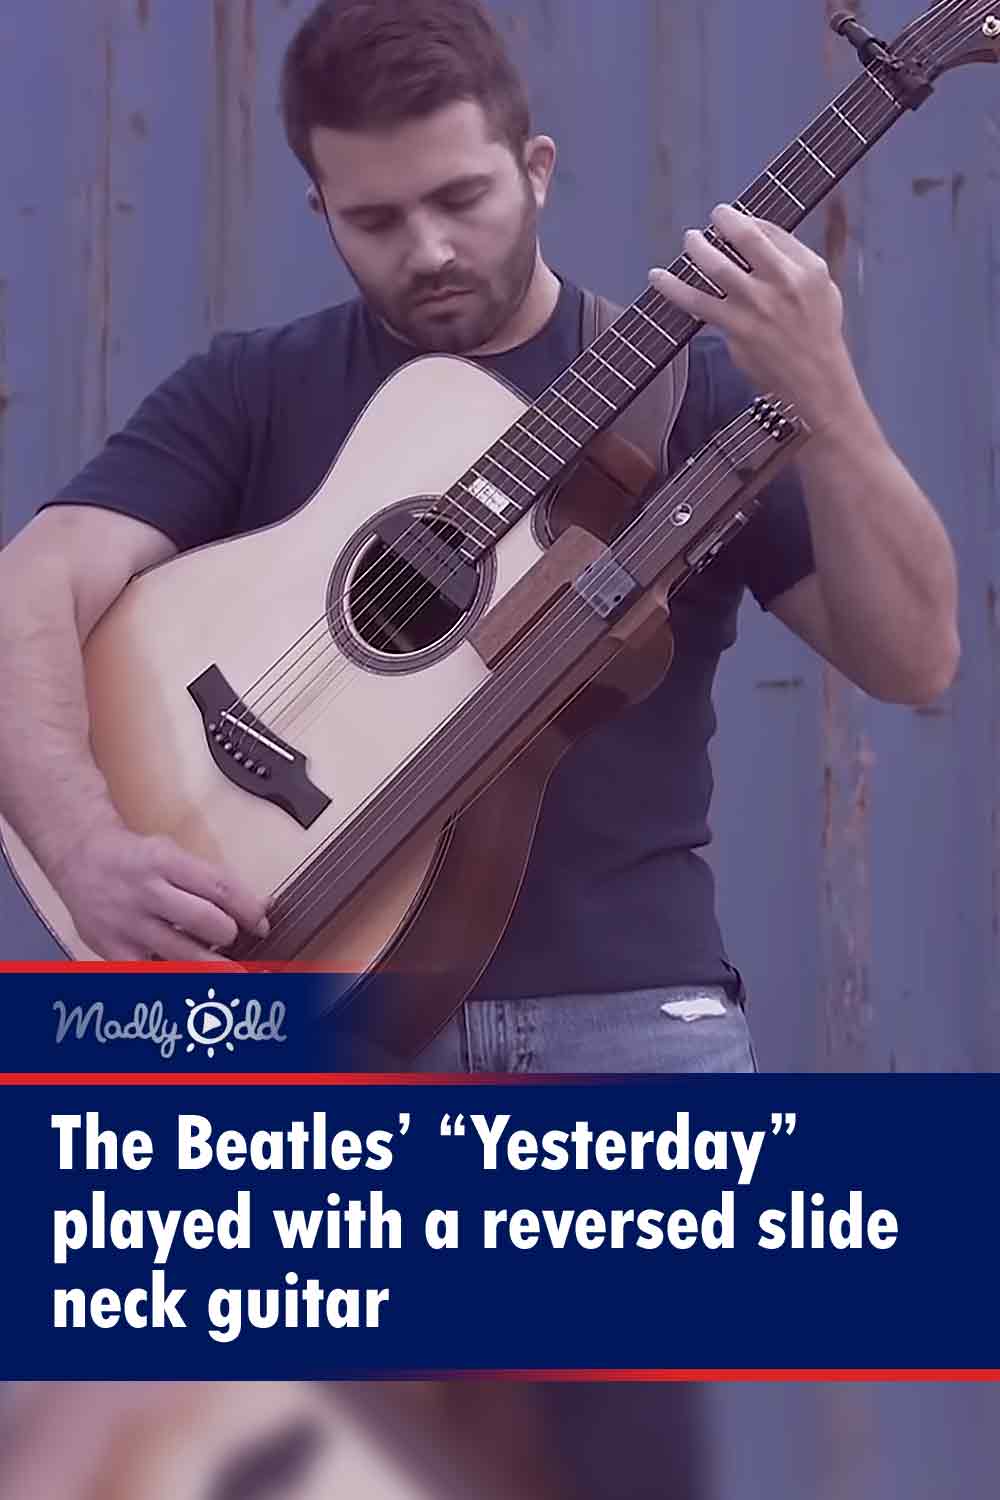 The Beatles’ “Yesterday” played with a reversed slide neck guitar